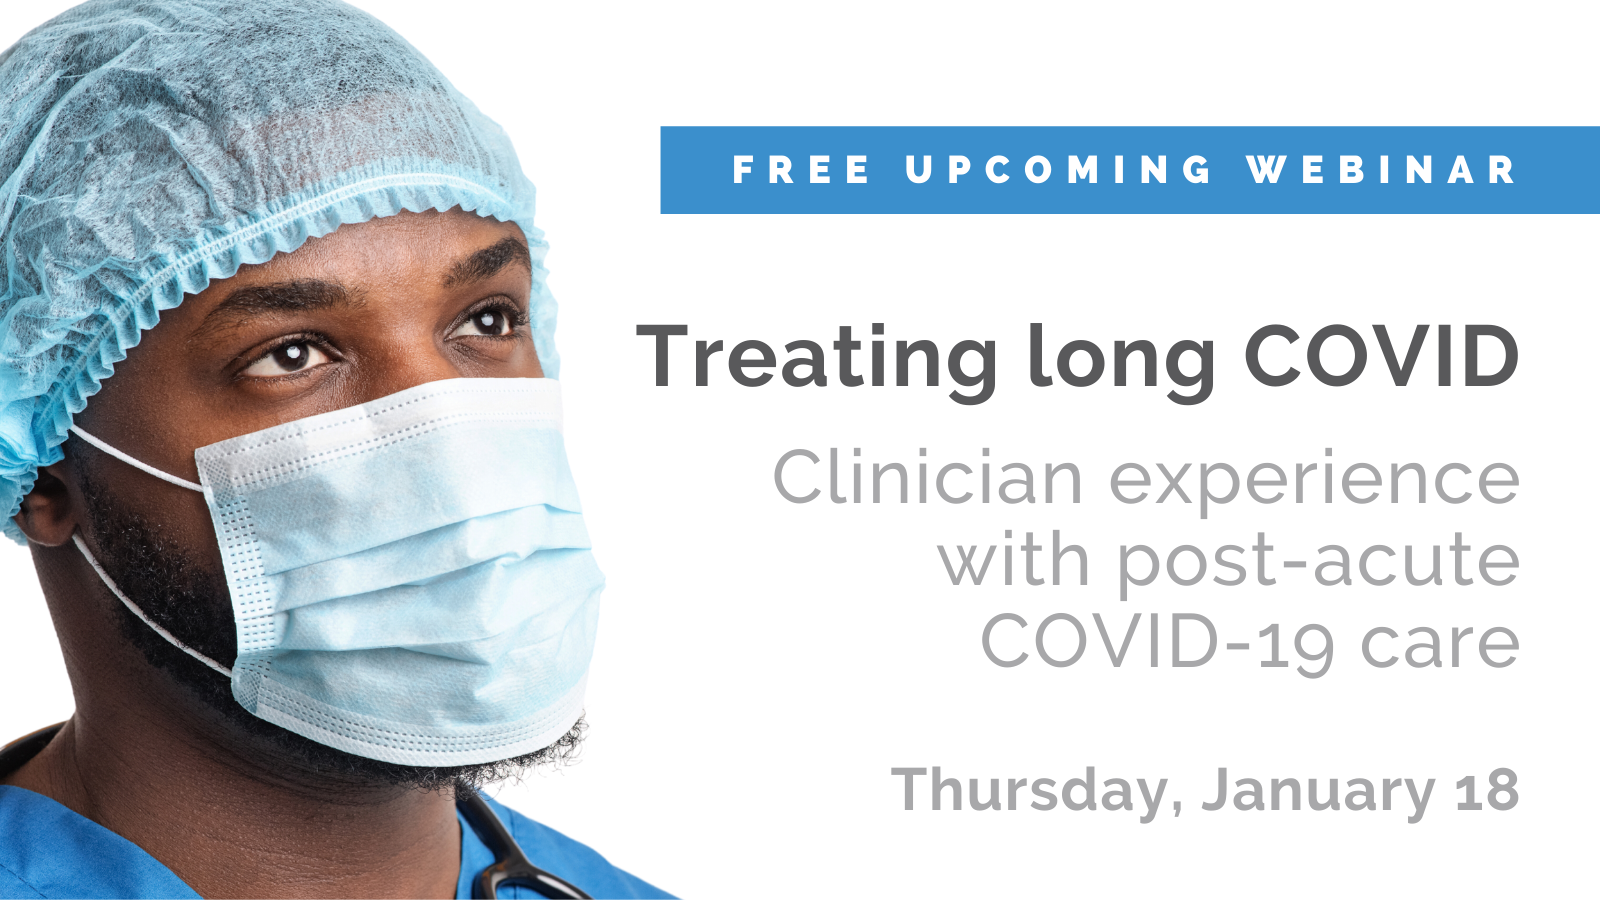 Featured image for “Treating long COVID: Clinician experience with post-acute COVID-19 care (webinar)”